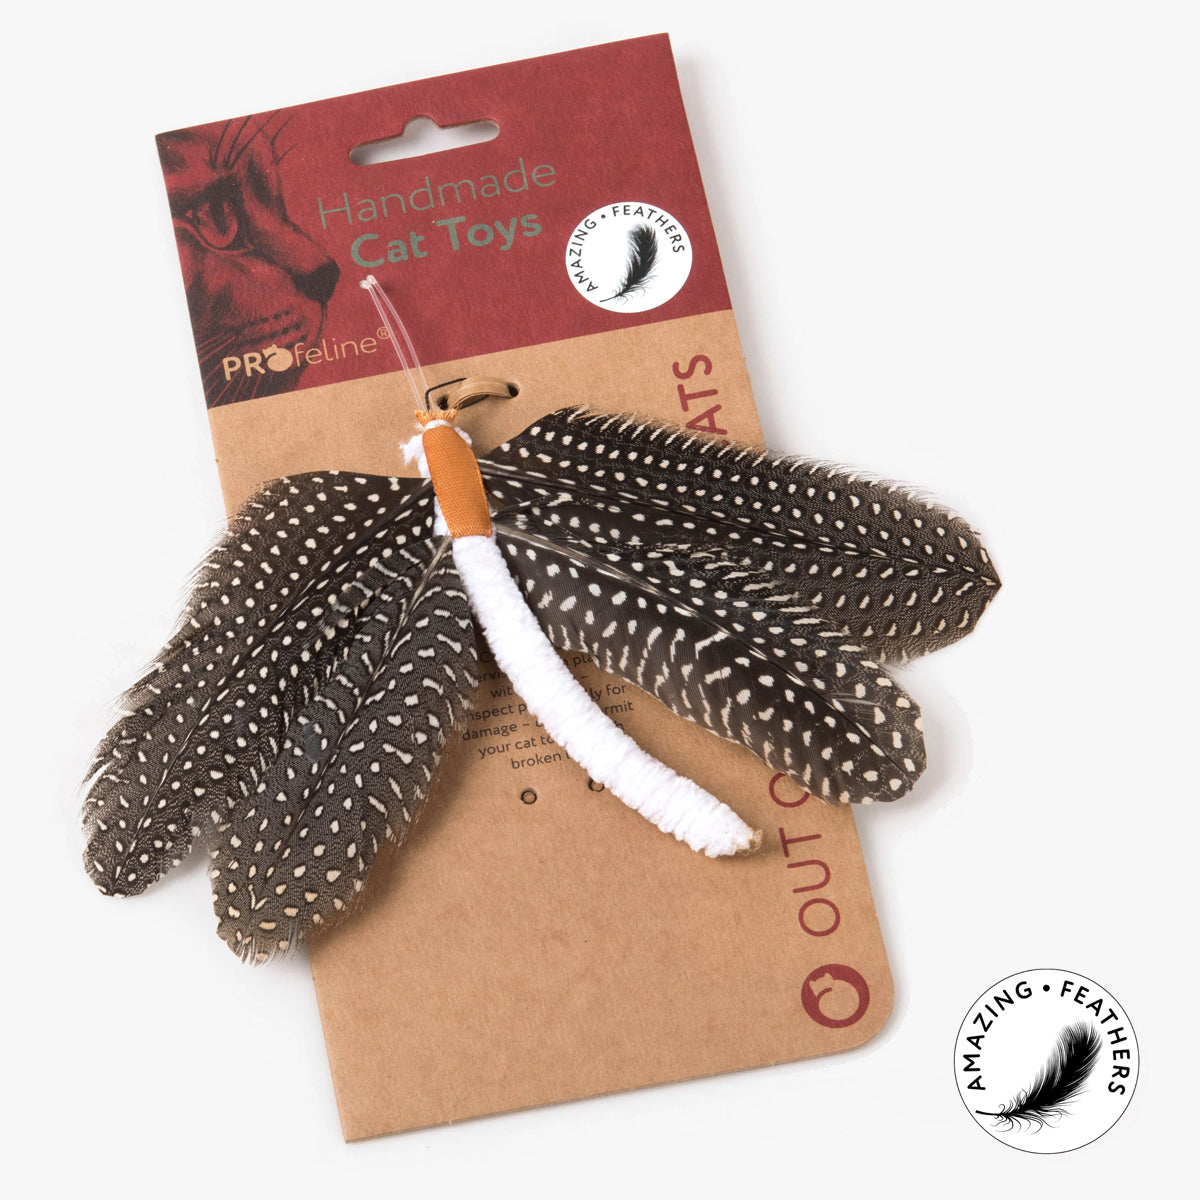 Profeline Butterfly Cat Toy, Made With Polka Dot Feathers In Black & White | at Made Moggie